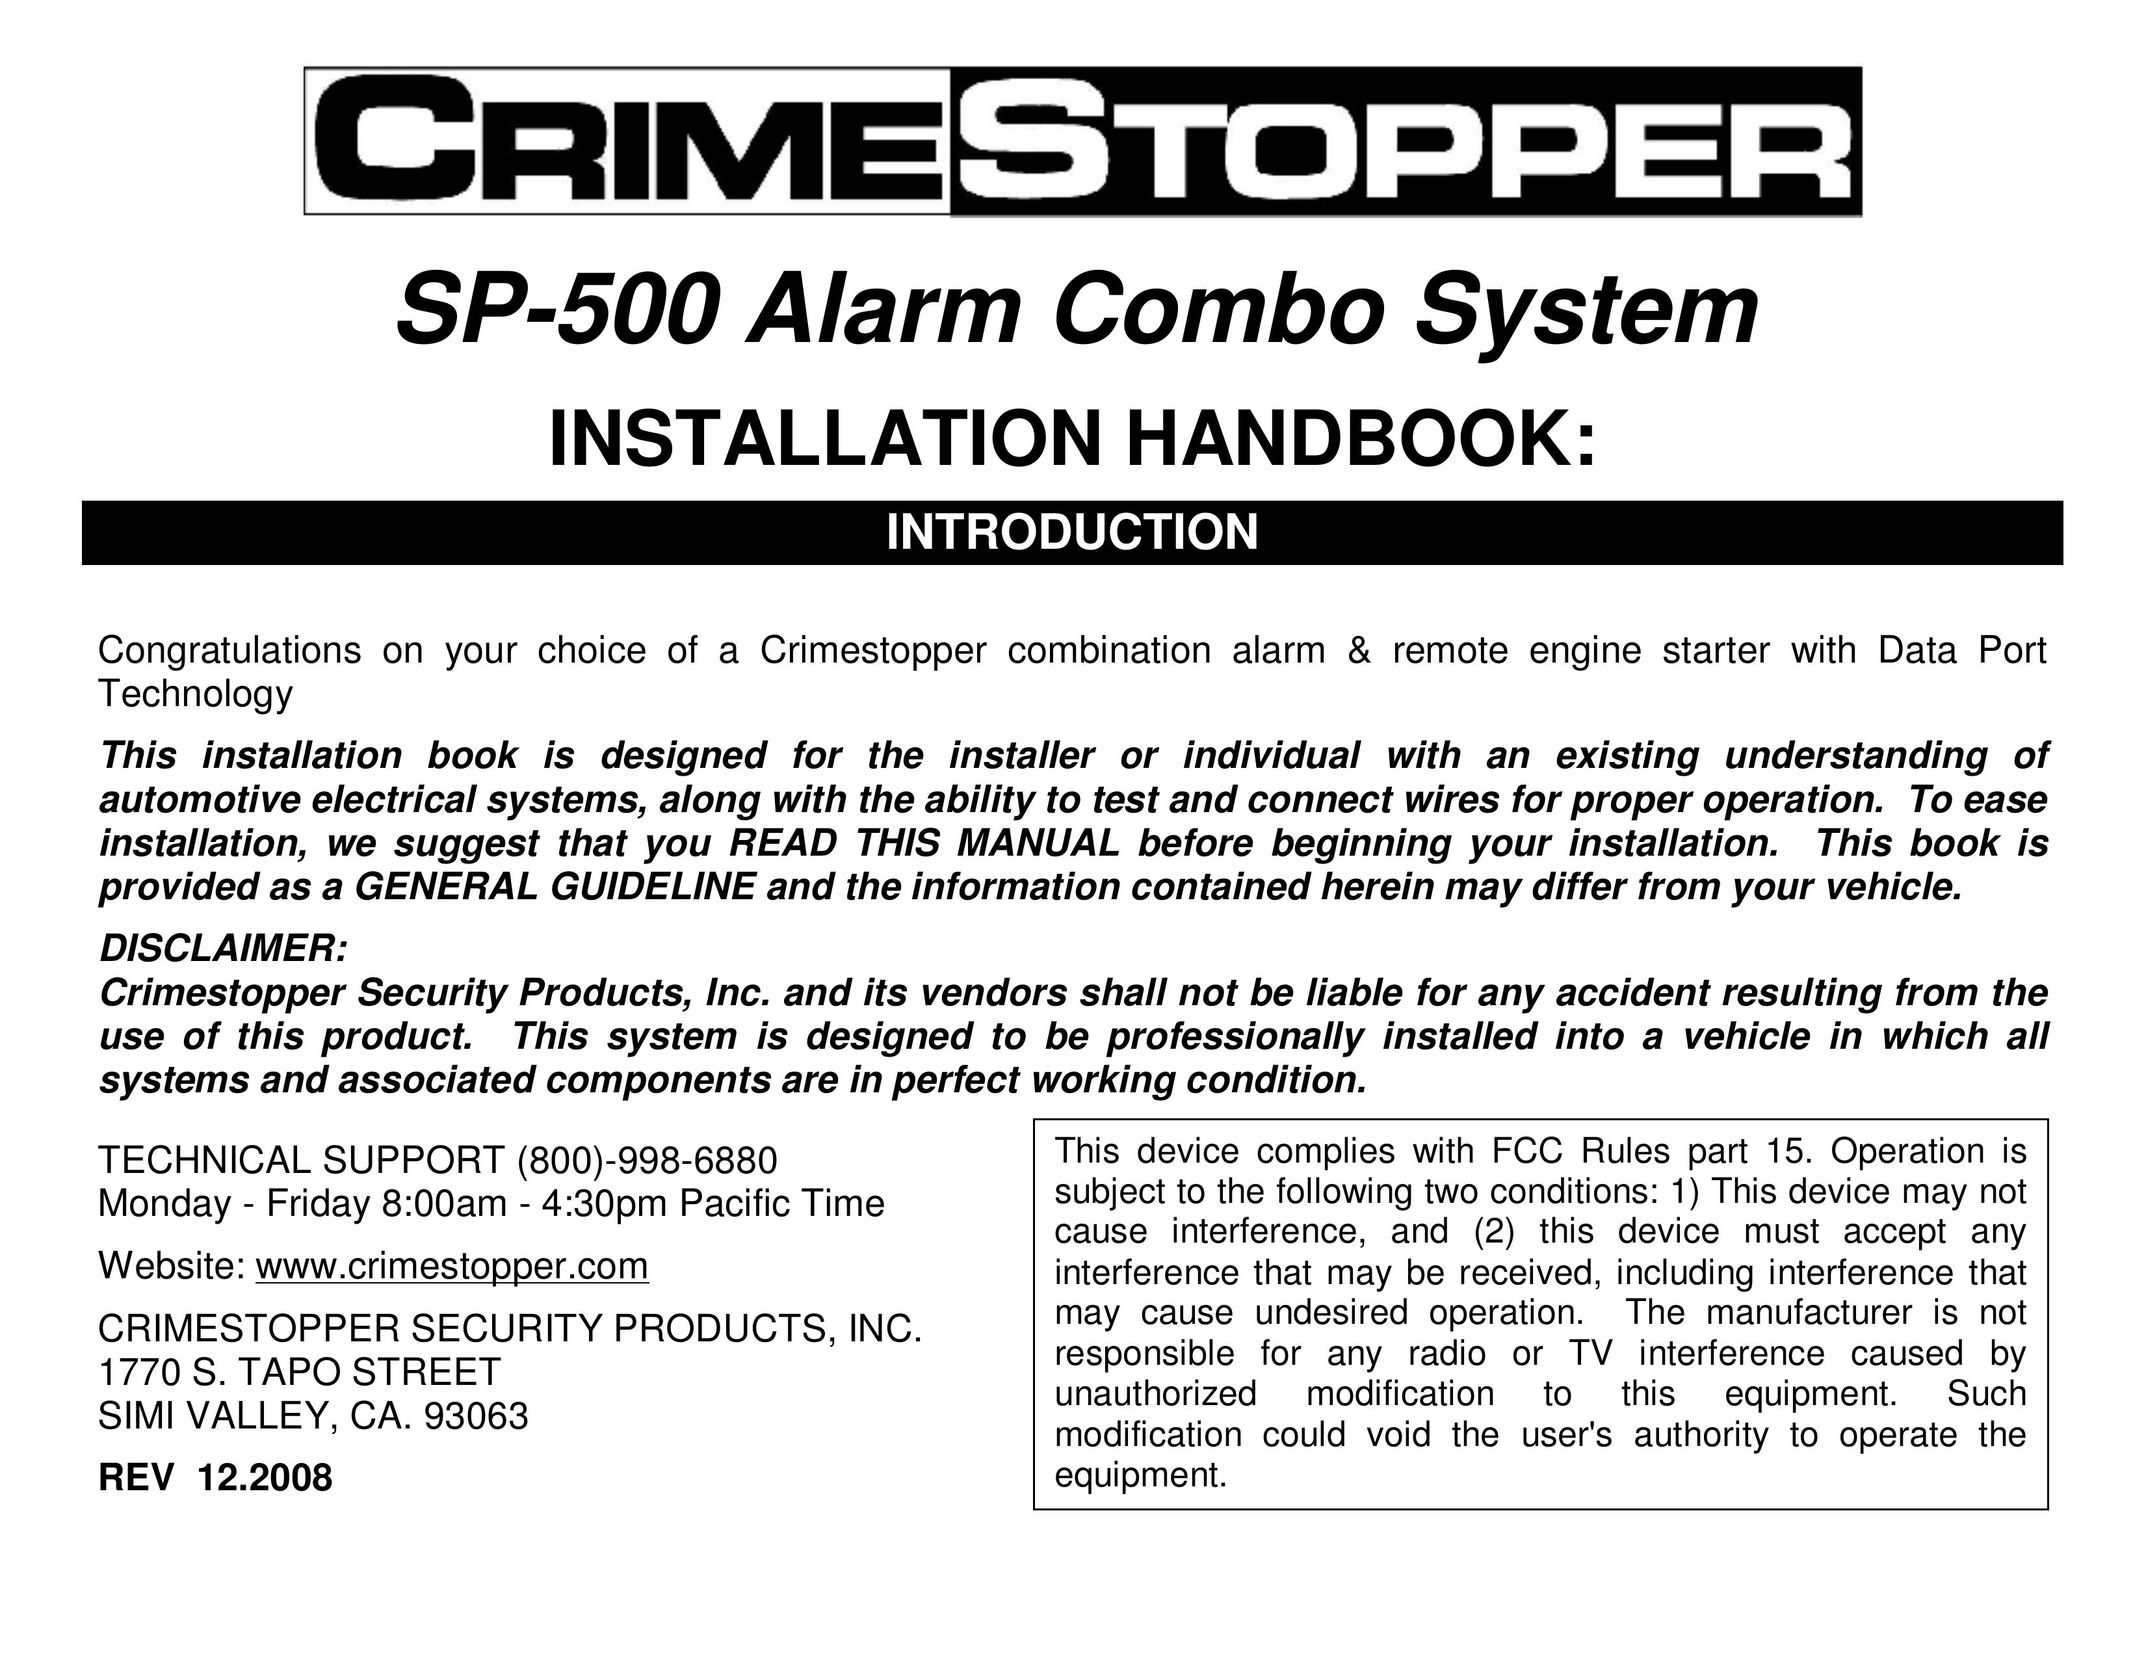 Crimestopper Security Products SP-500 Indoor Furnishings User Manual